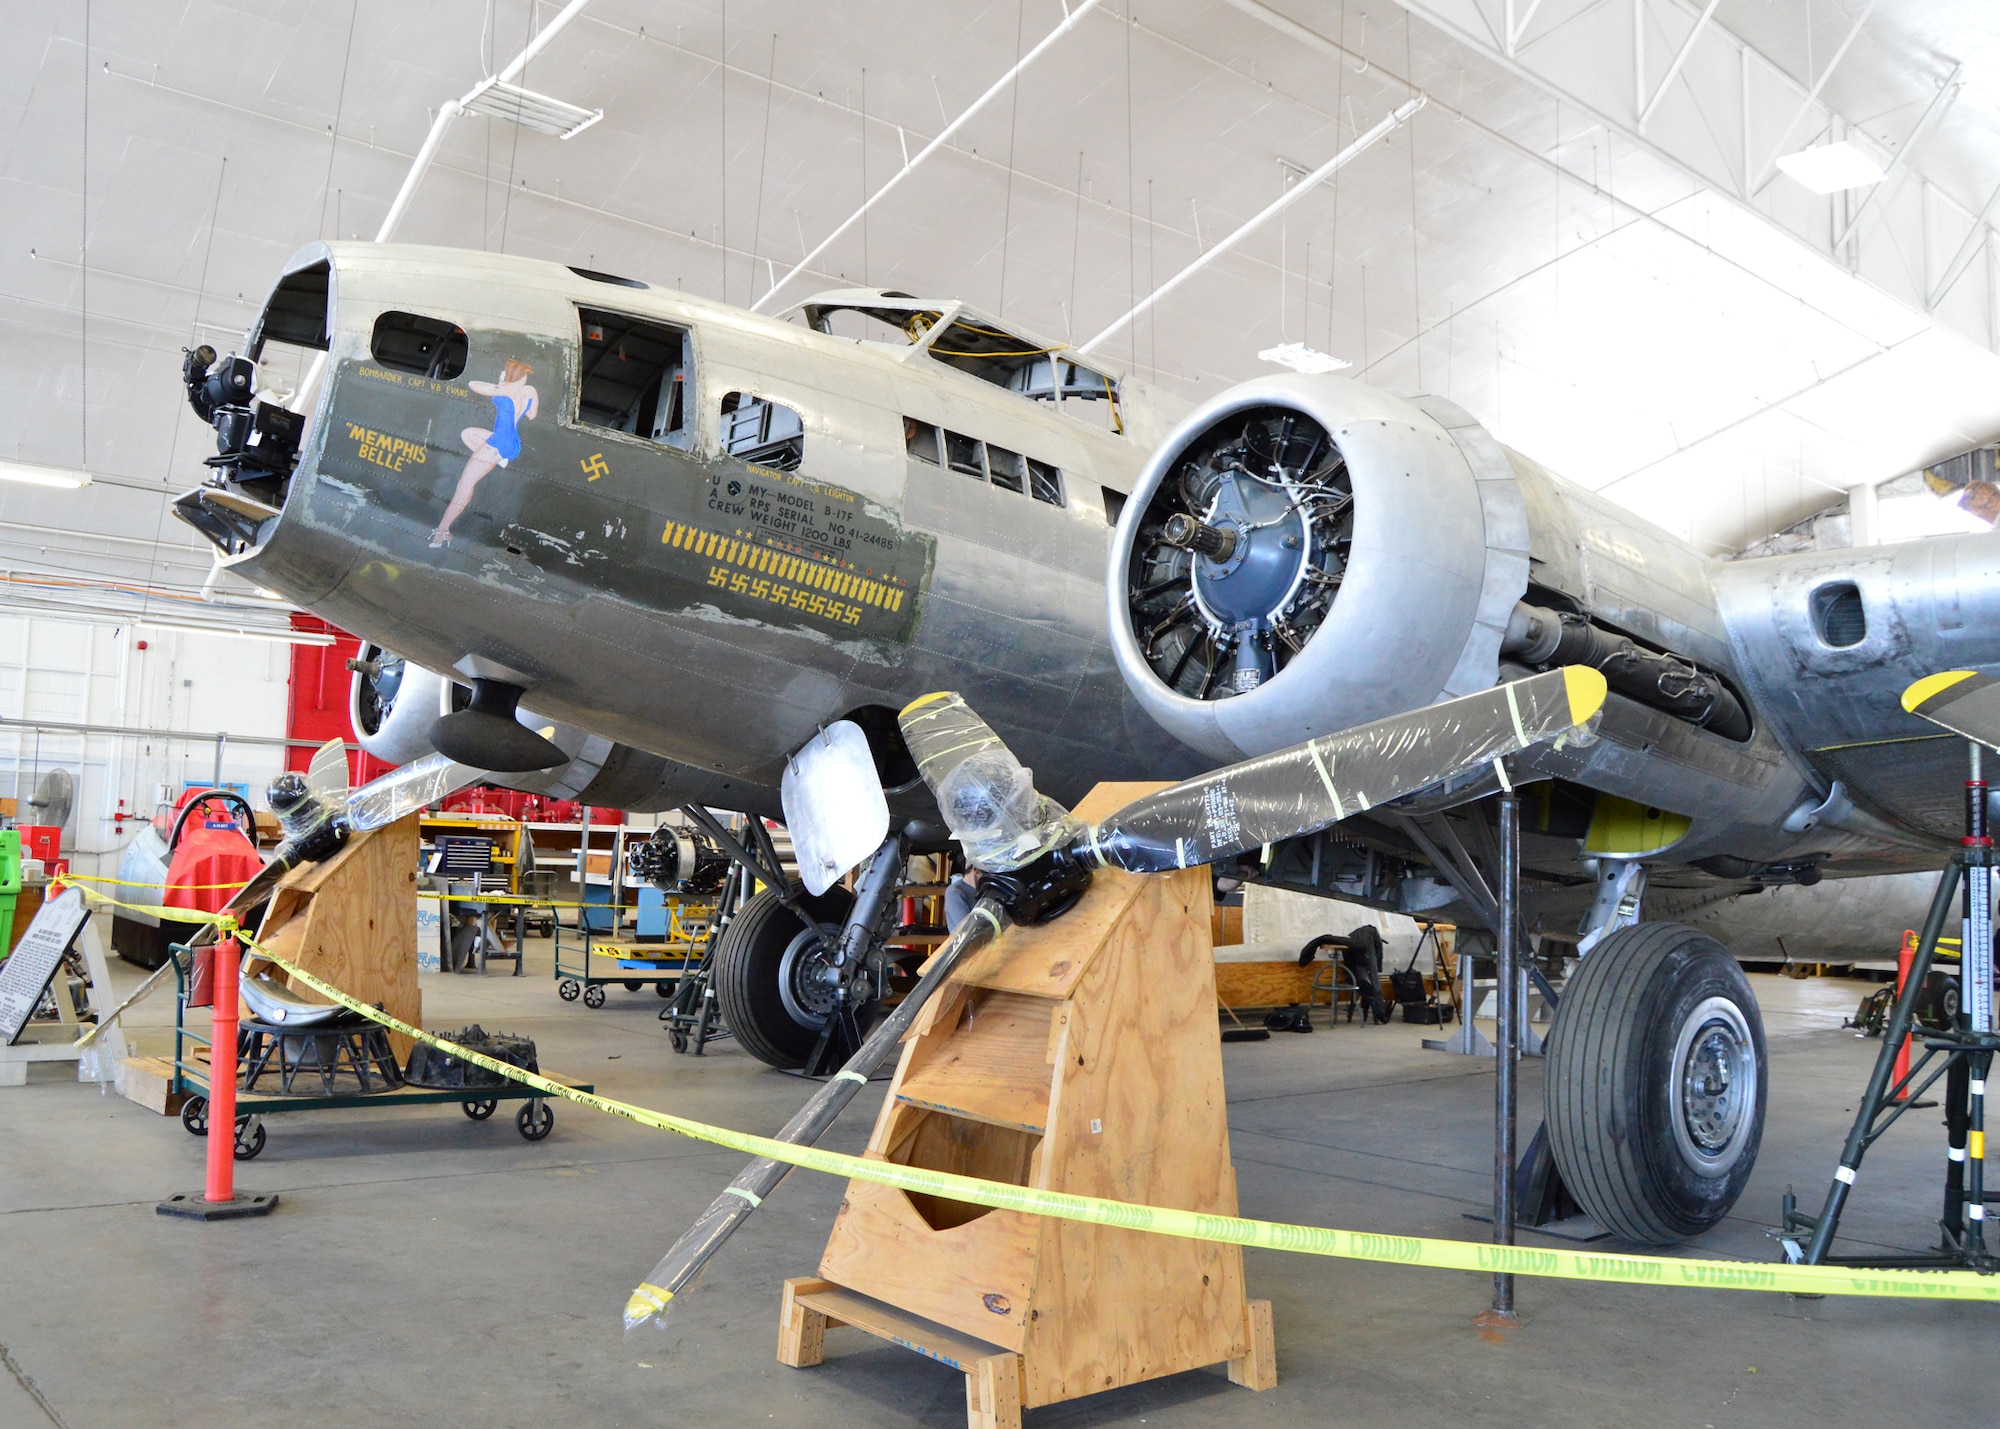 DAYTON, Ohio (06/2015) -- The B-17F "Memphis Belle" in the restoration hangar at the National Museum of the United States Air Force. (U.S. Air Force photo)